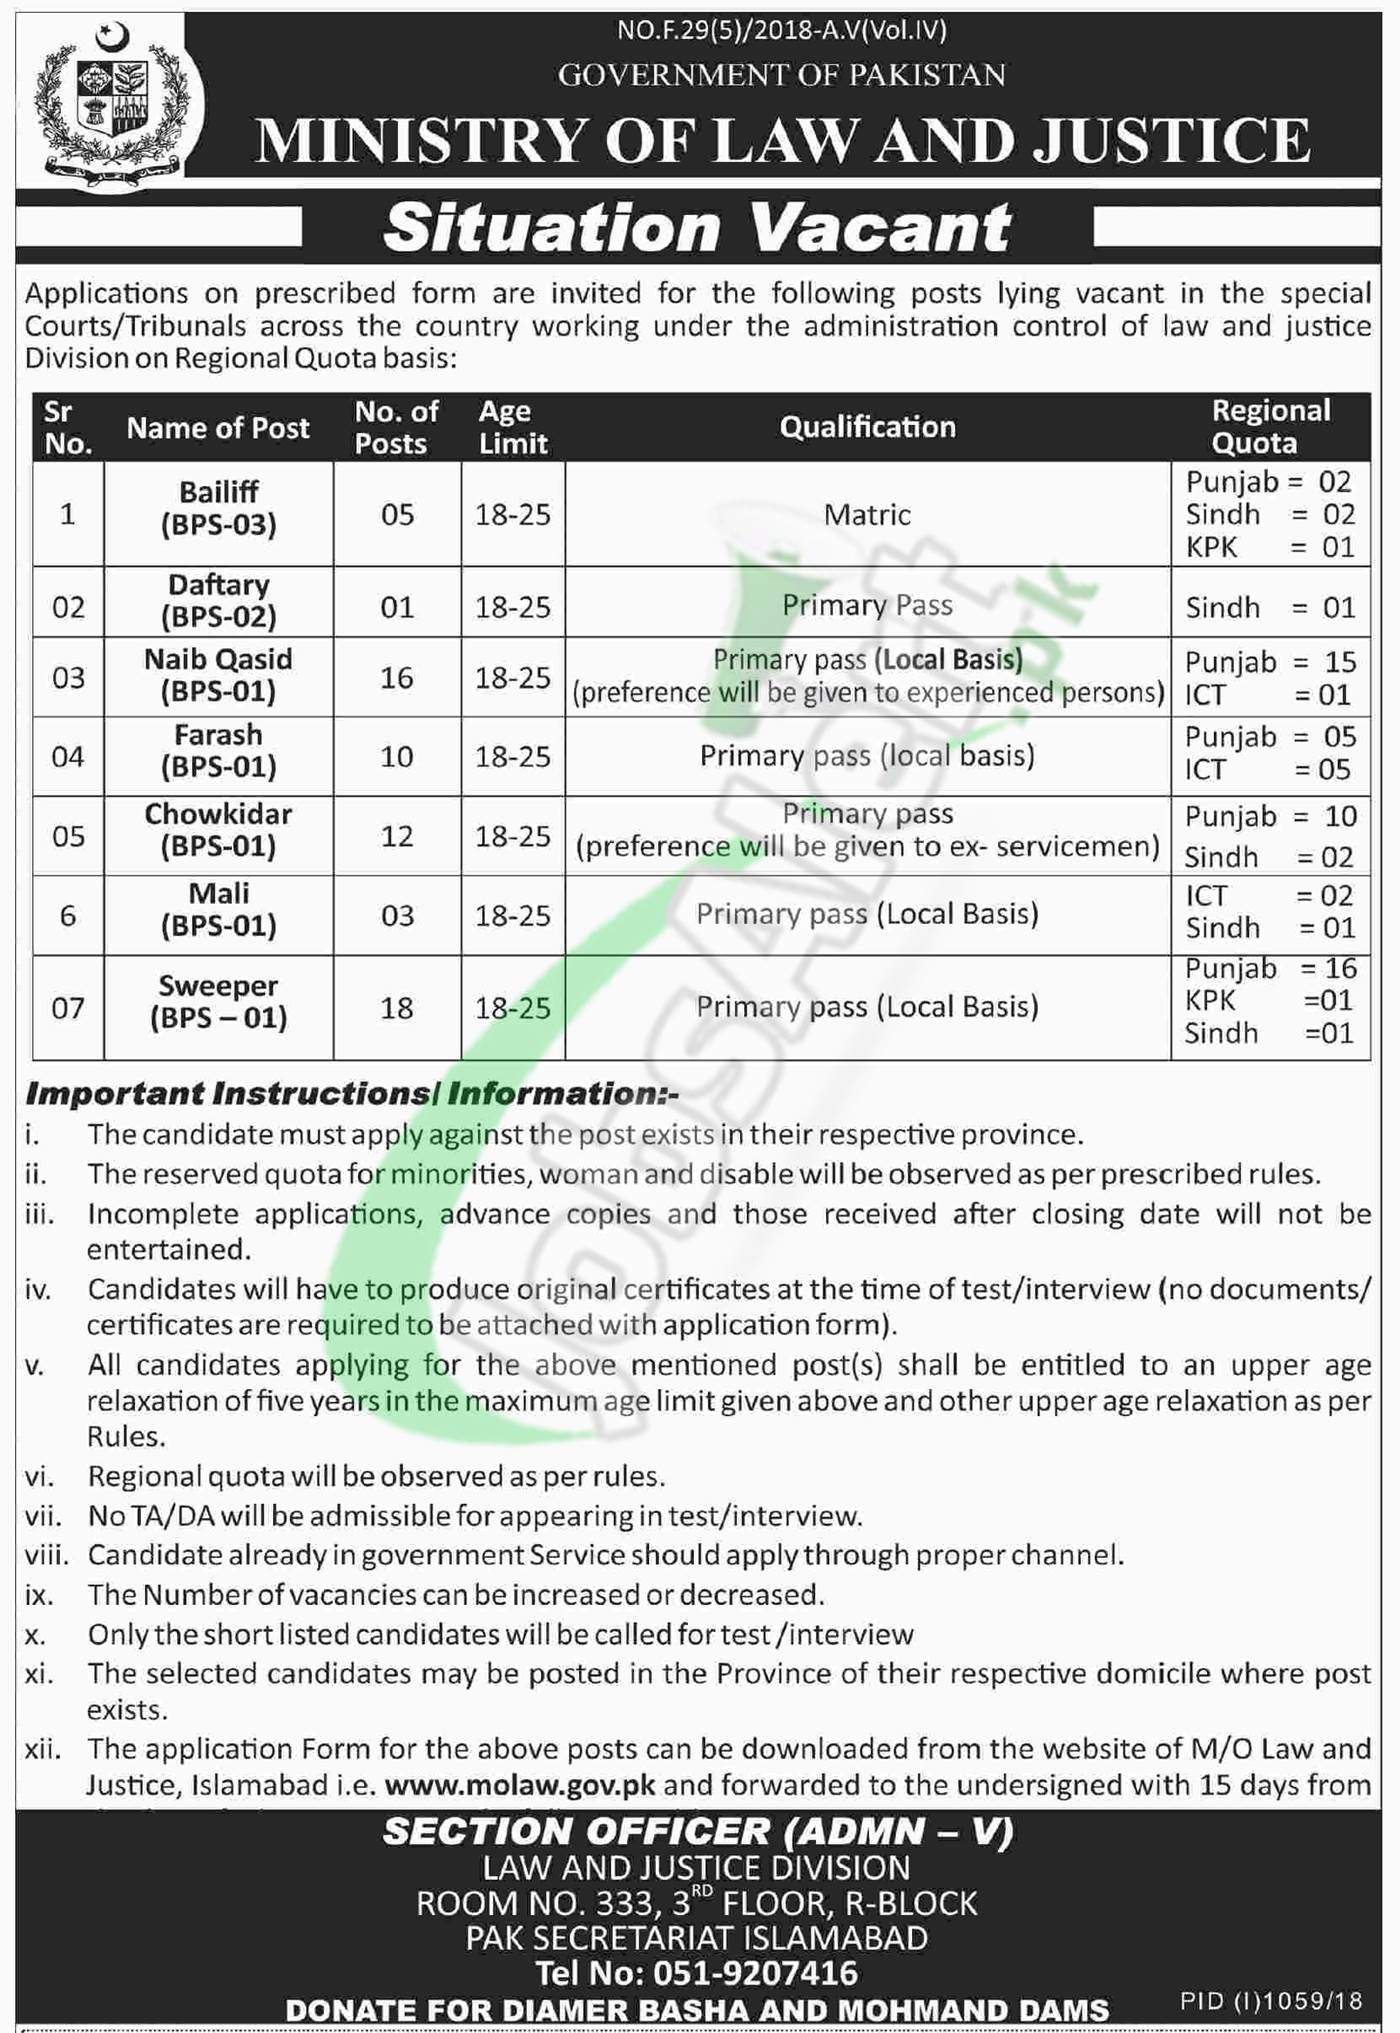 Ministry of Law and Justice Pakistan Jobs